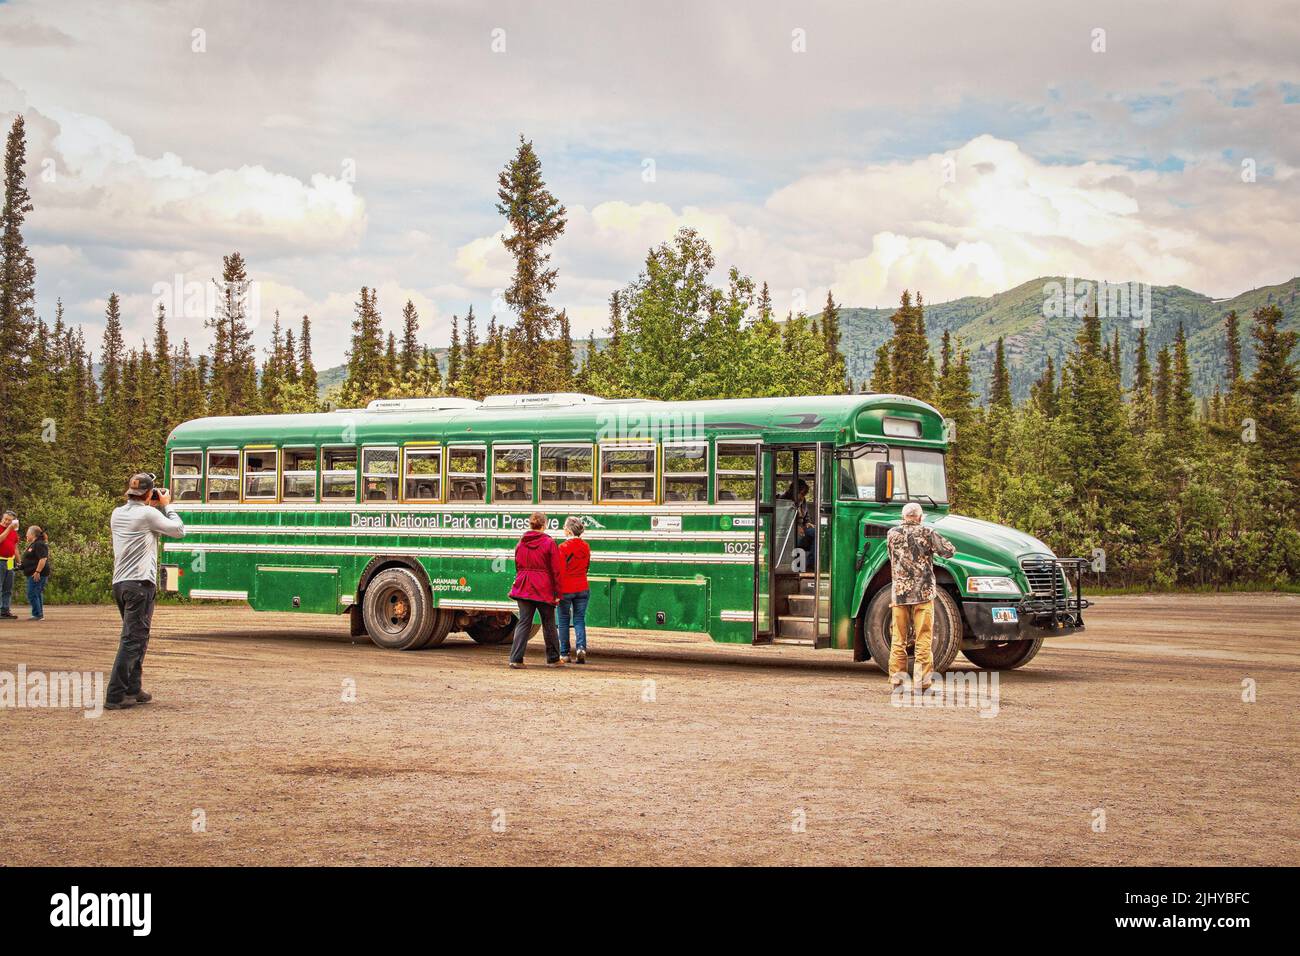 06-22-2002 Denali Alaska USA - Green transit bus in Denali National Park with tourists - one taking a picture - and evergreen trees and mountains in b Stock Photo